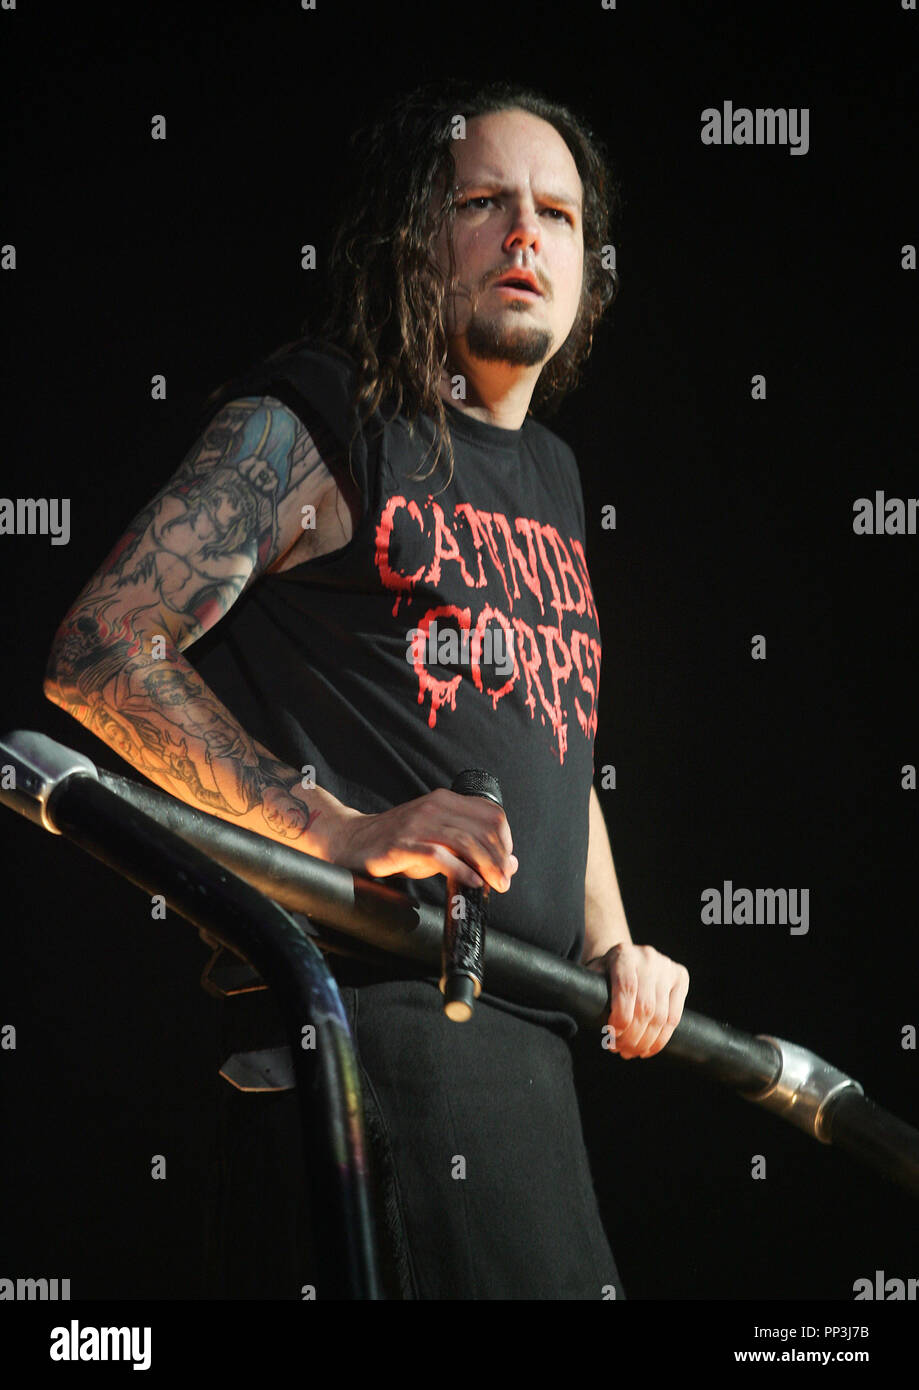 Jonathan Davis with Korn performs in concert at the Sound Advice Amphitheatre in West Palm Beach, Florida on August 14, 2007. Stock Photo